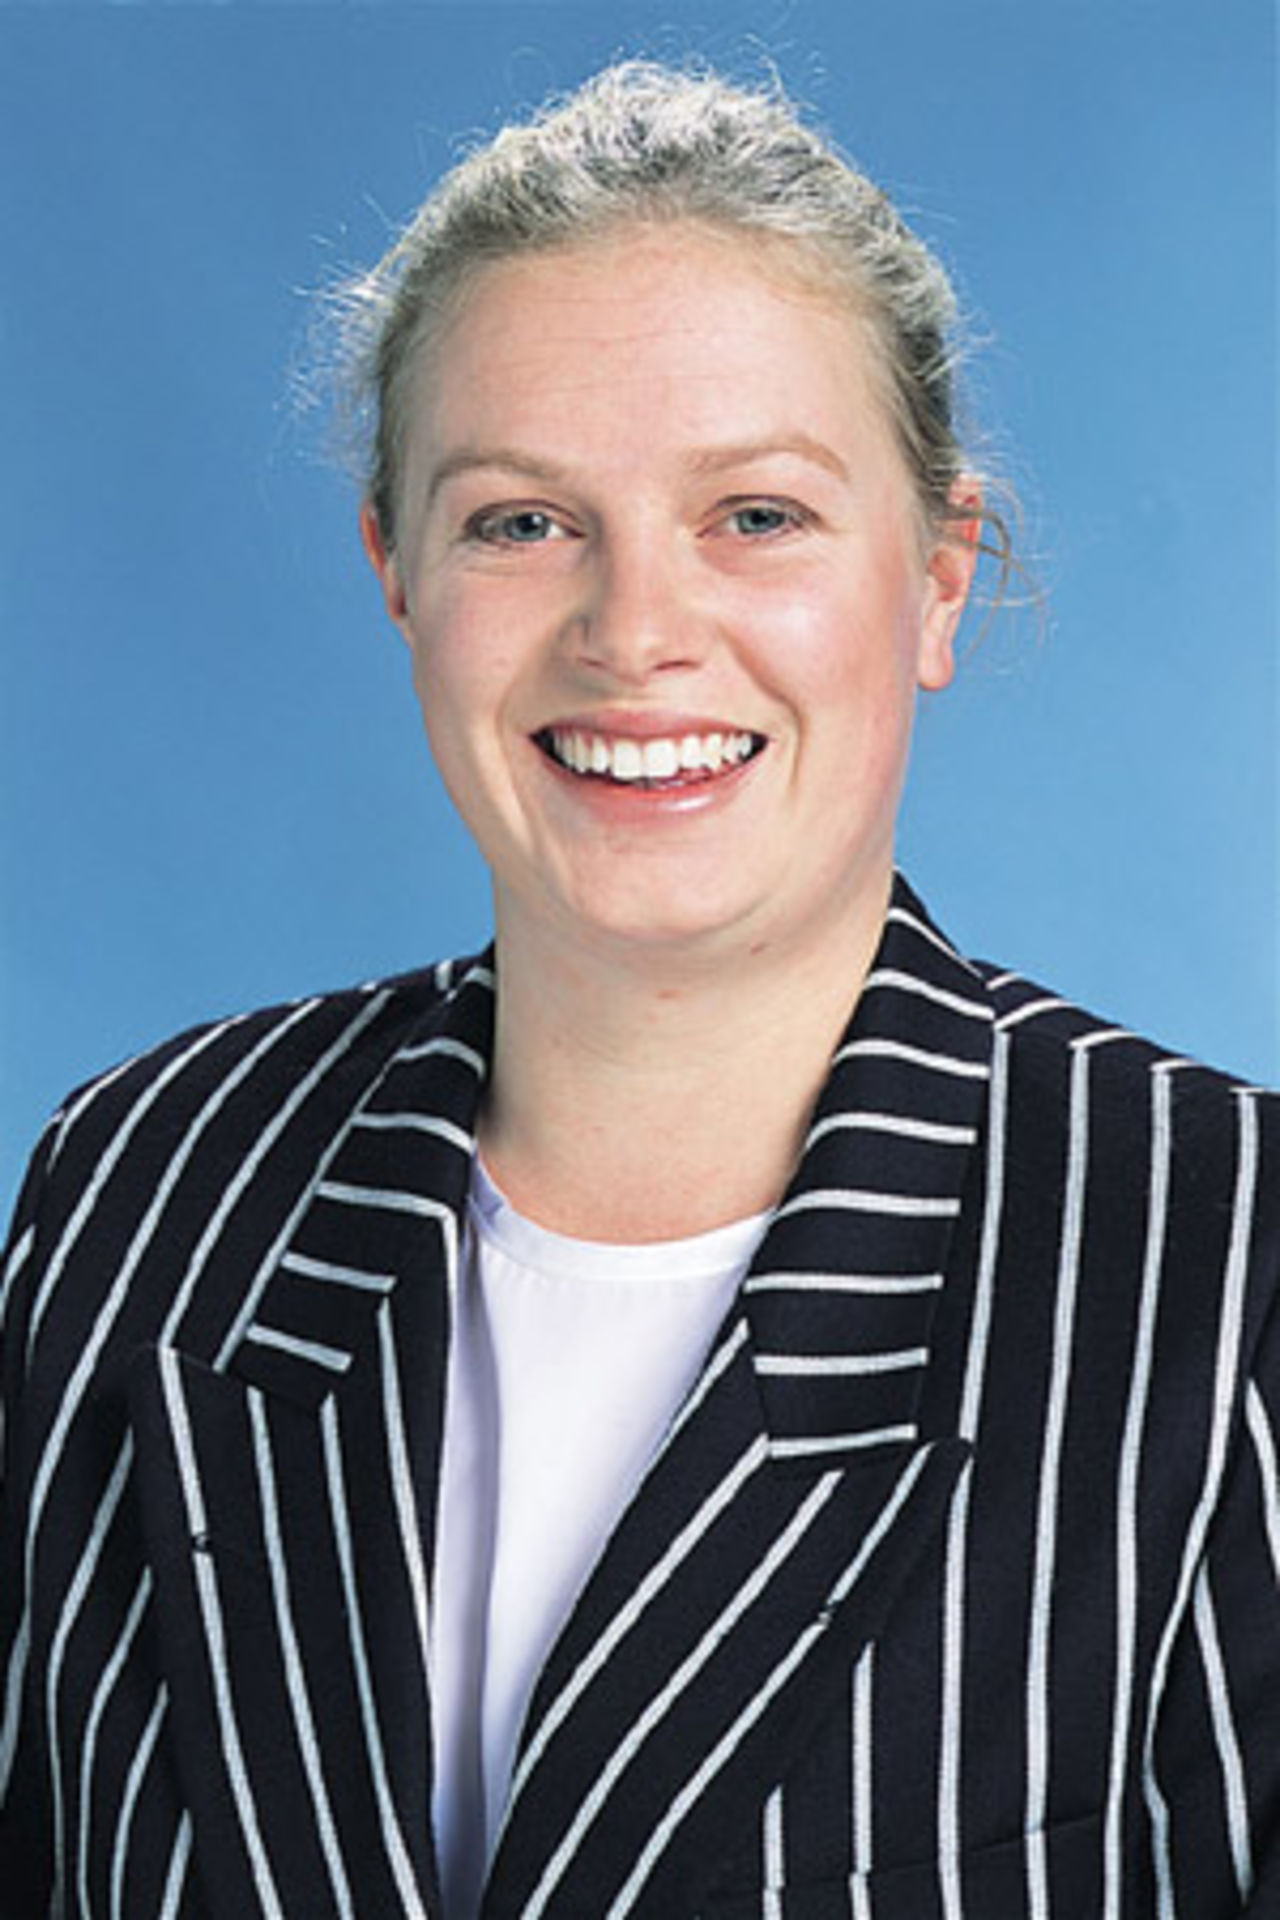 Portrait of Fiona Fraser - New Zealand women's player in the 2001/02 season.